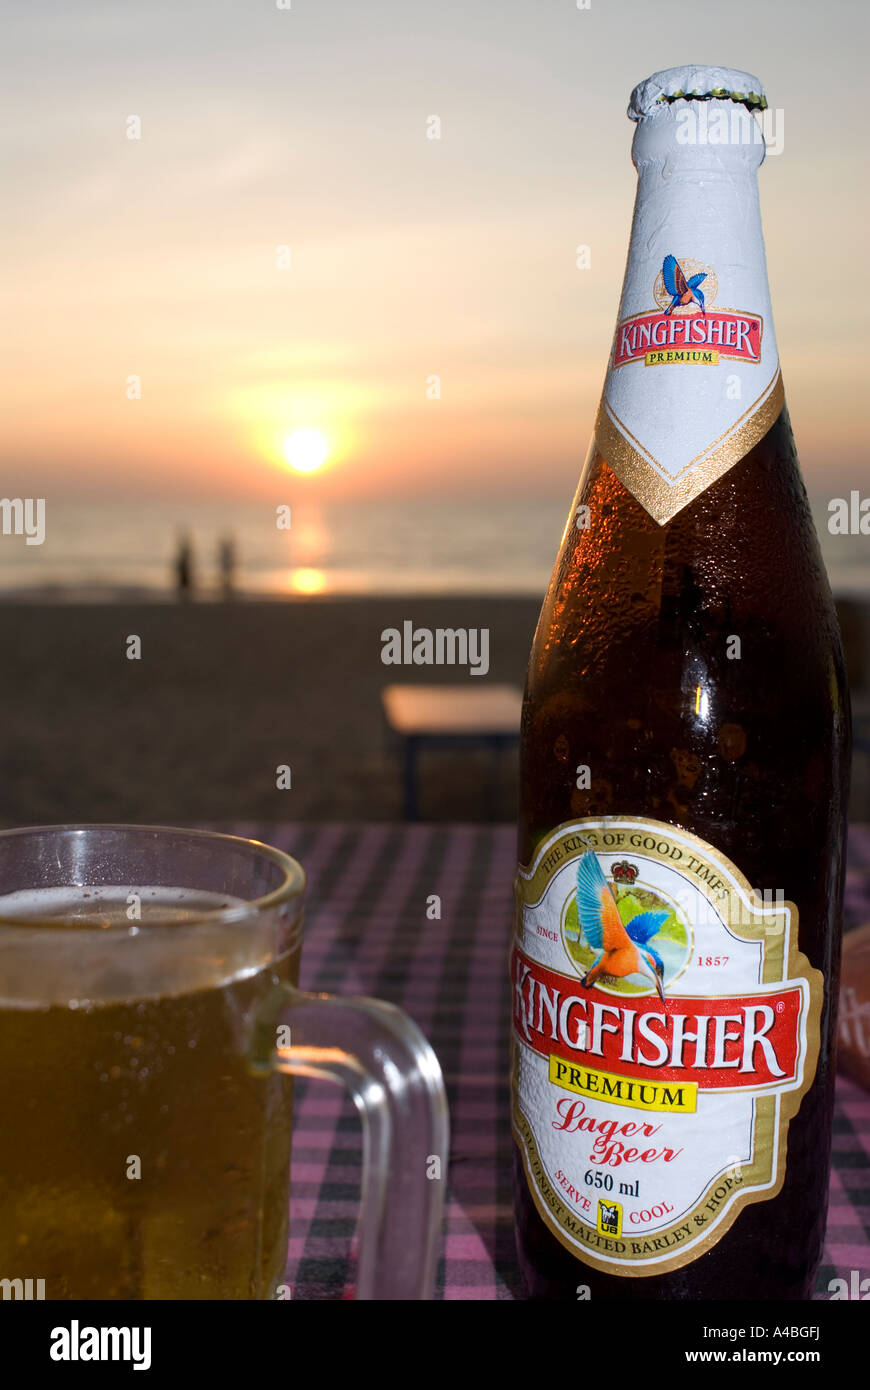 Stock image of Kingfisher Beer and glass at sunset in Goa Stock Photo